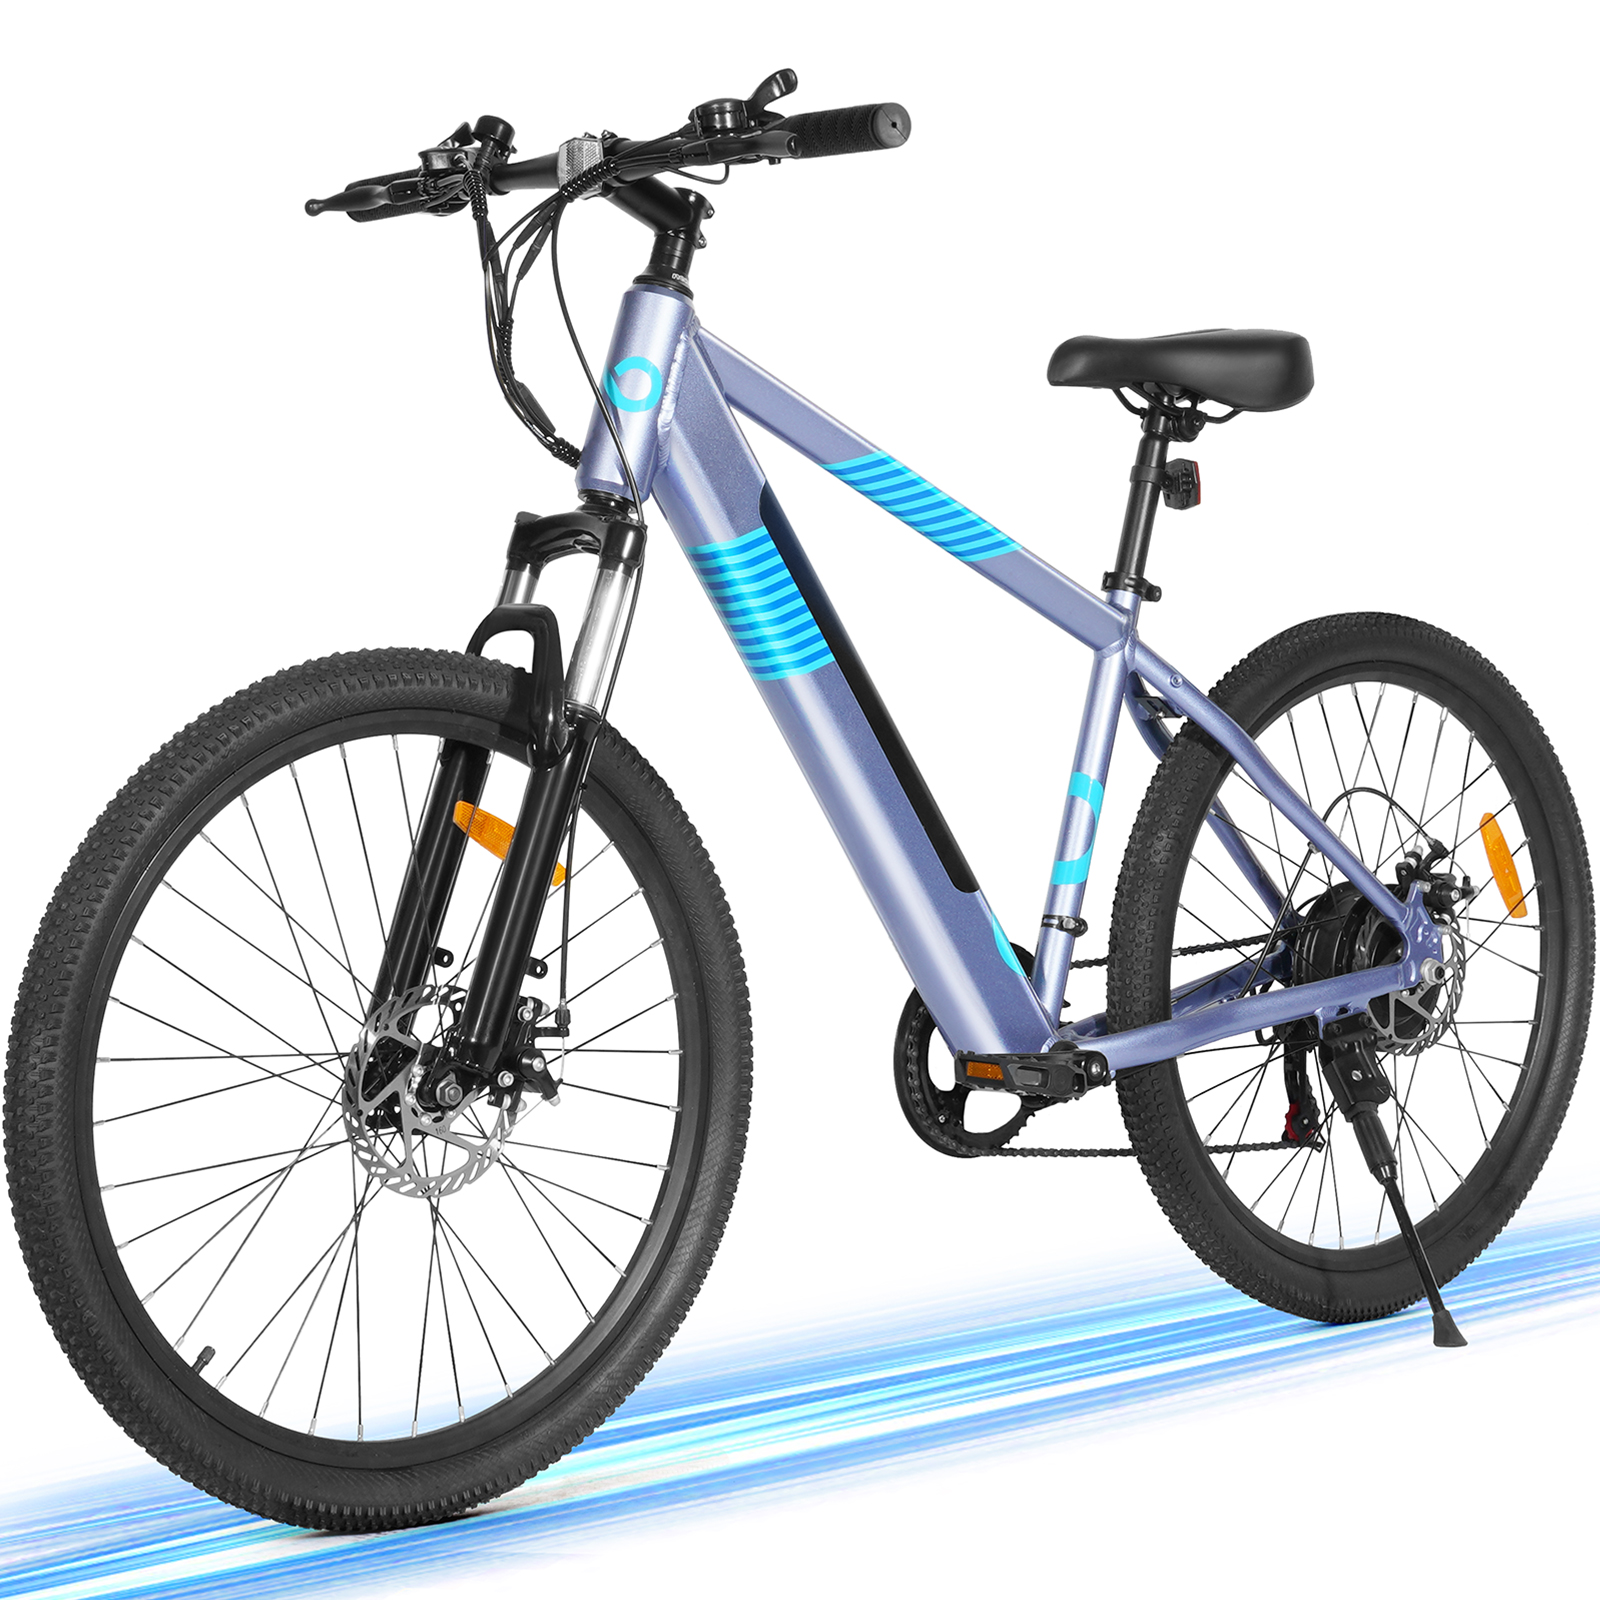 Kistp 350W Electric Bike 26" Electric Mountain Bike for Adults, 36V Built-in Hidden Removable Battery with Shimano 7 Speed City Commuter Bike for Man Woman - UL2849 - image 1 of 8